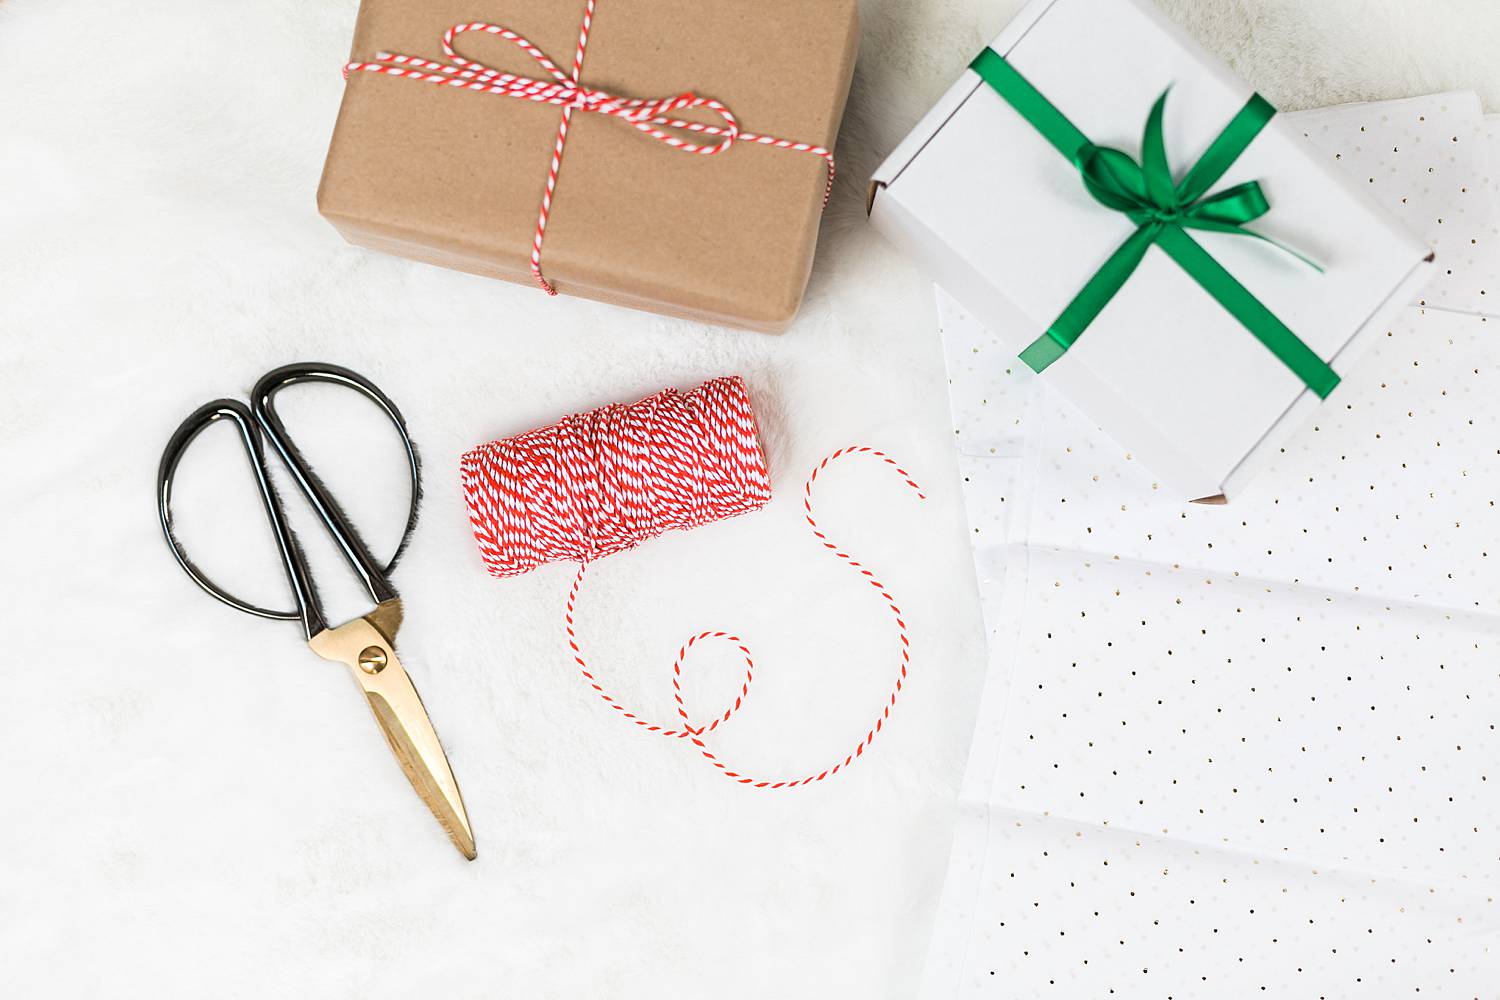 holiday gifting with scissors, twine, and wrapped gifts on a white background